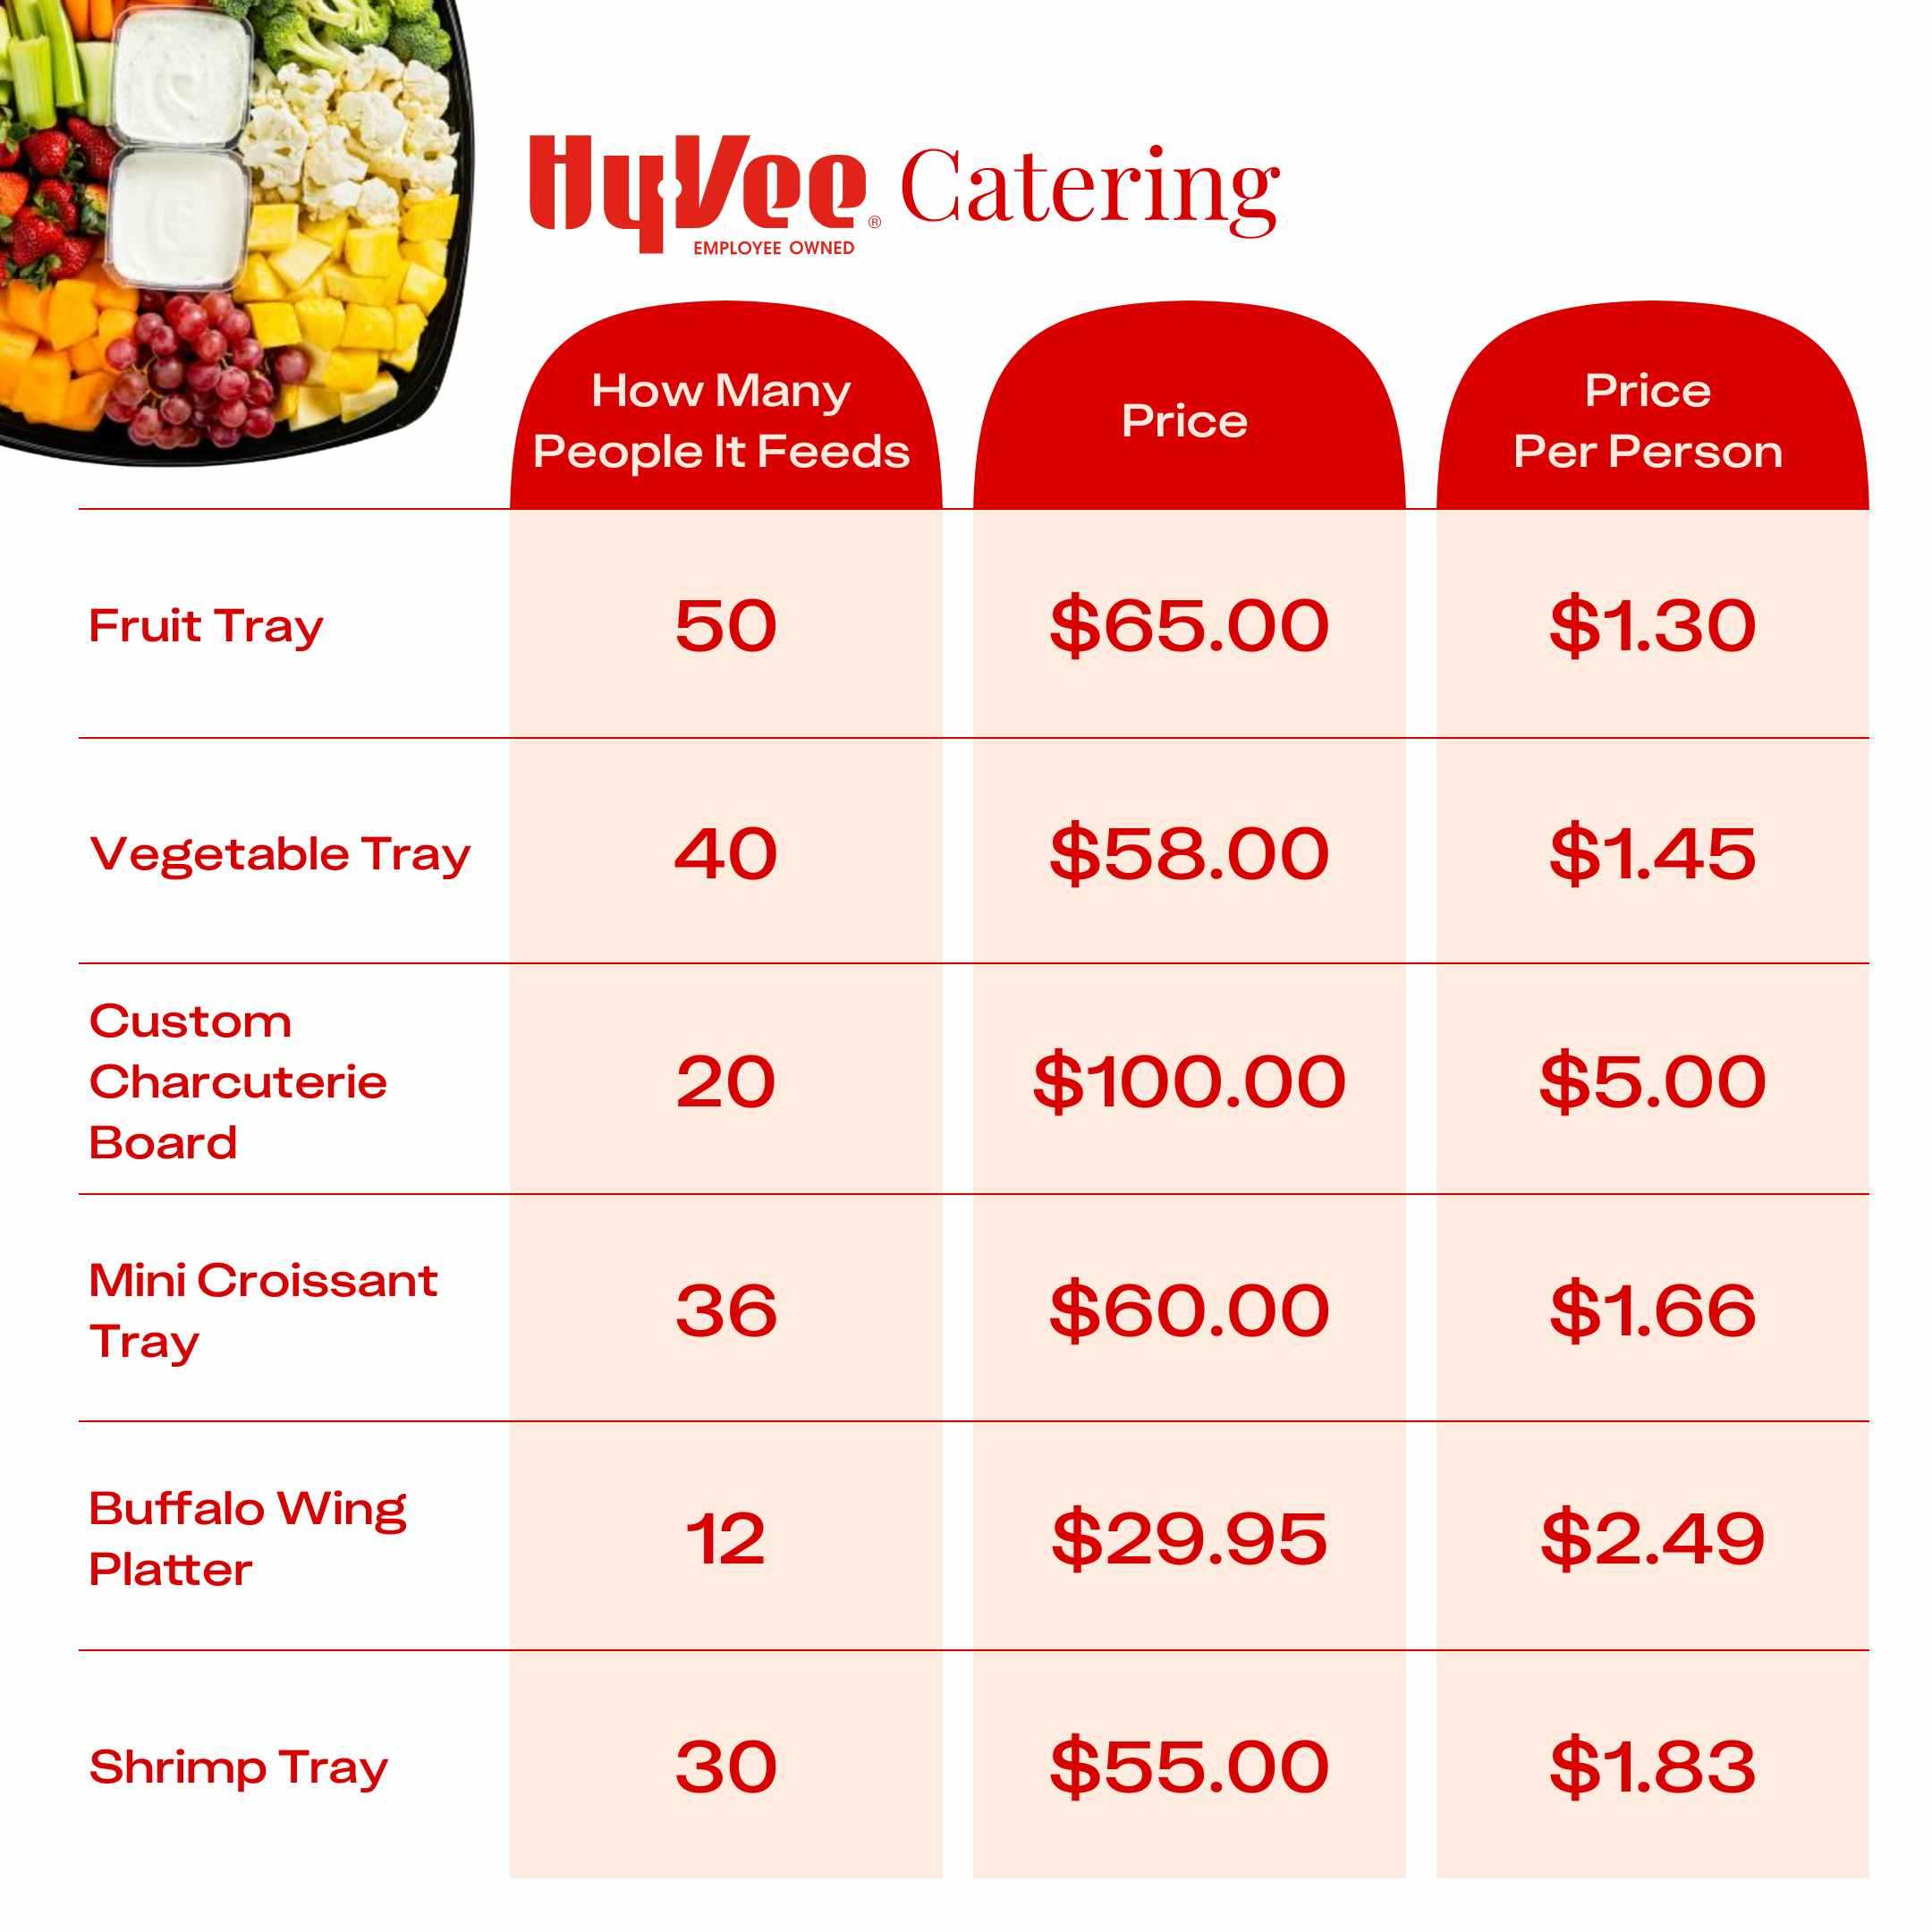 Hy-Vee Catering Prices Table